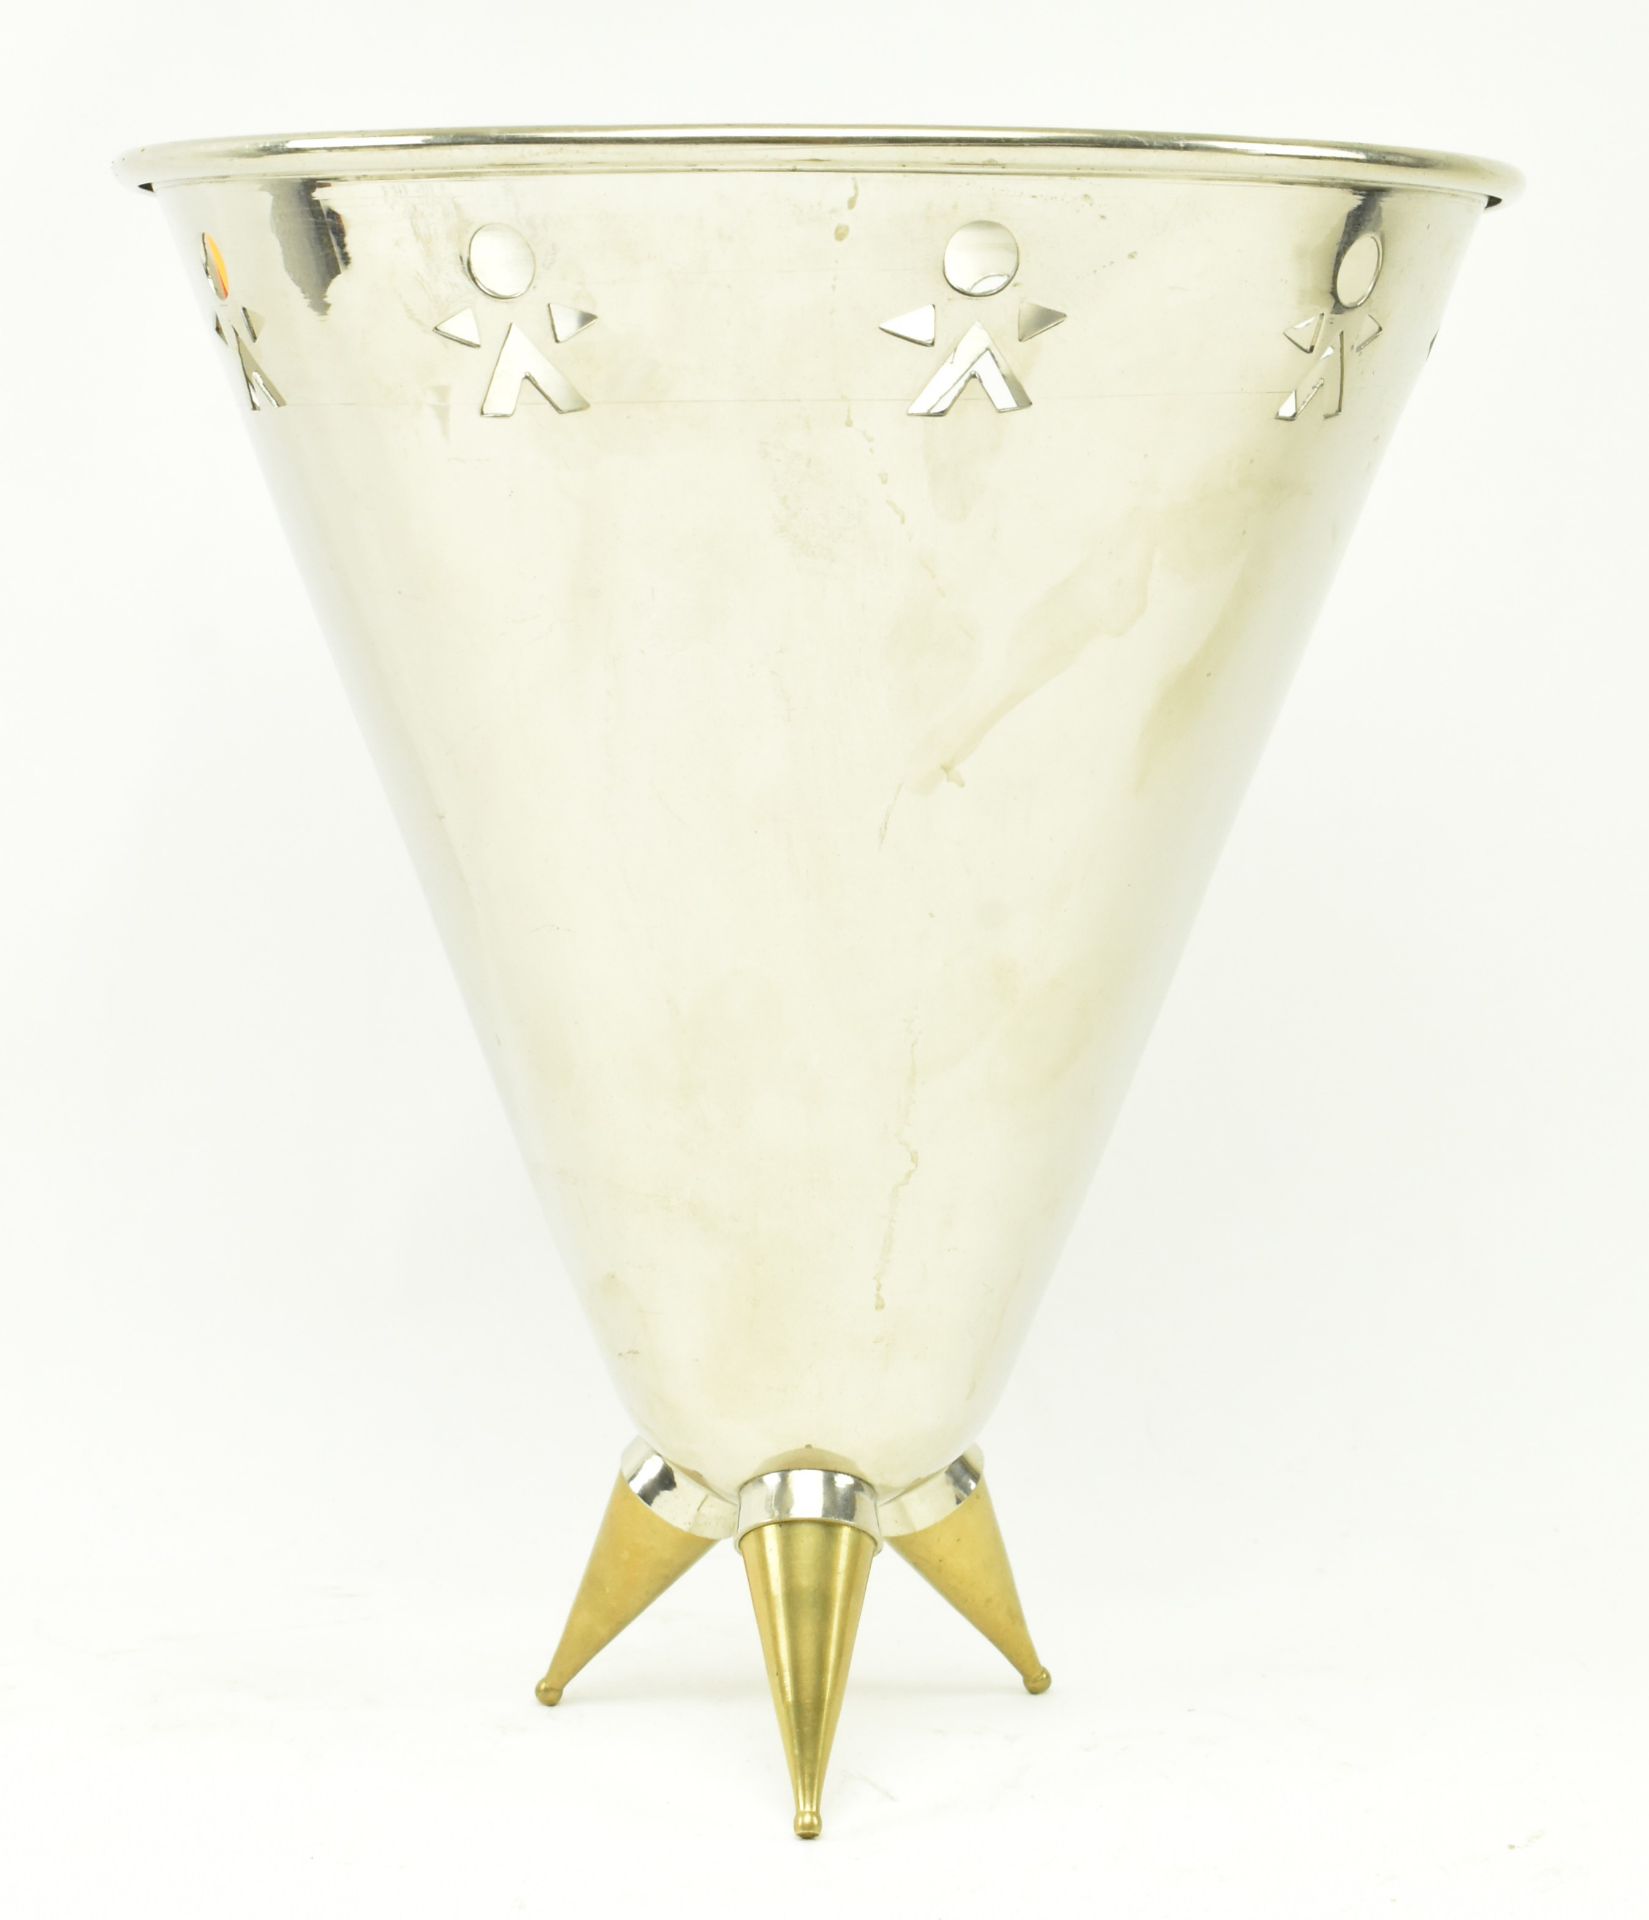 PHILIPPE STARCK (MANNER OF) - LATE 20TH CENTURY COOLER - Image 2 of 6